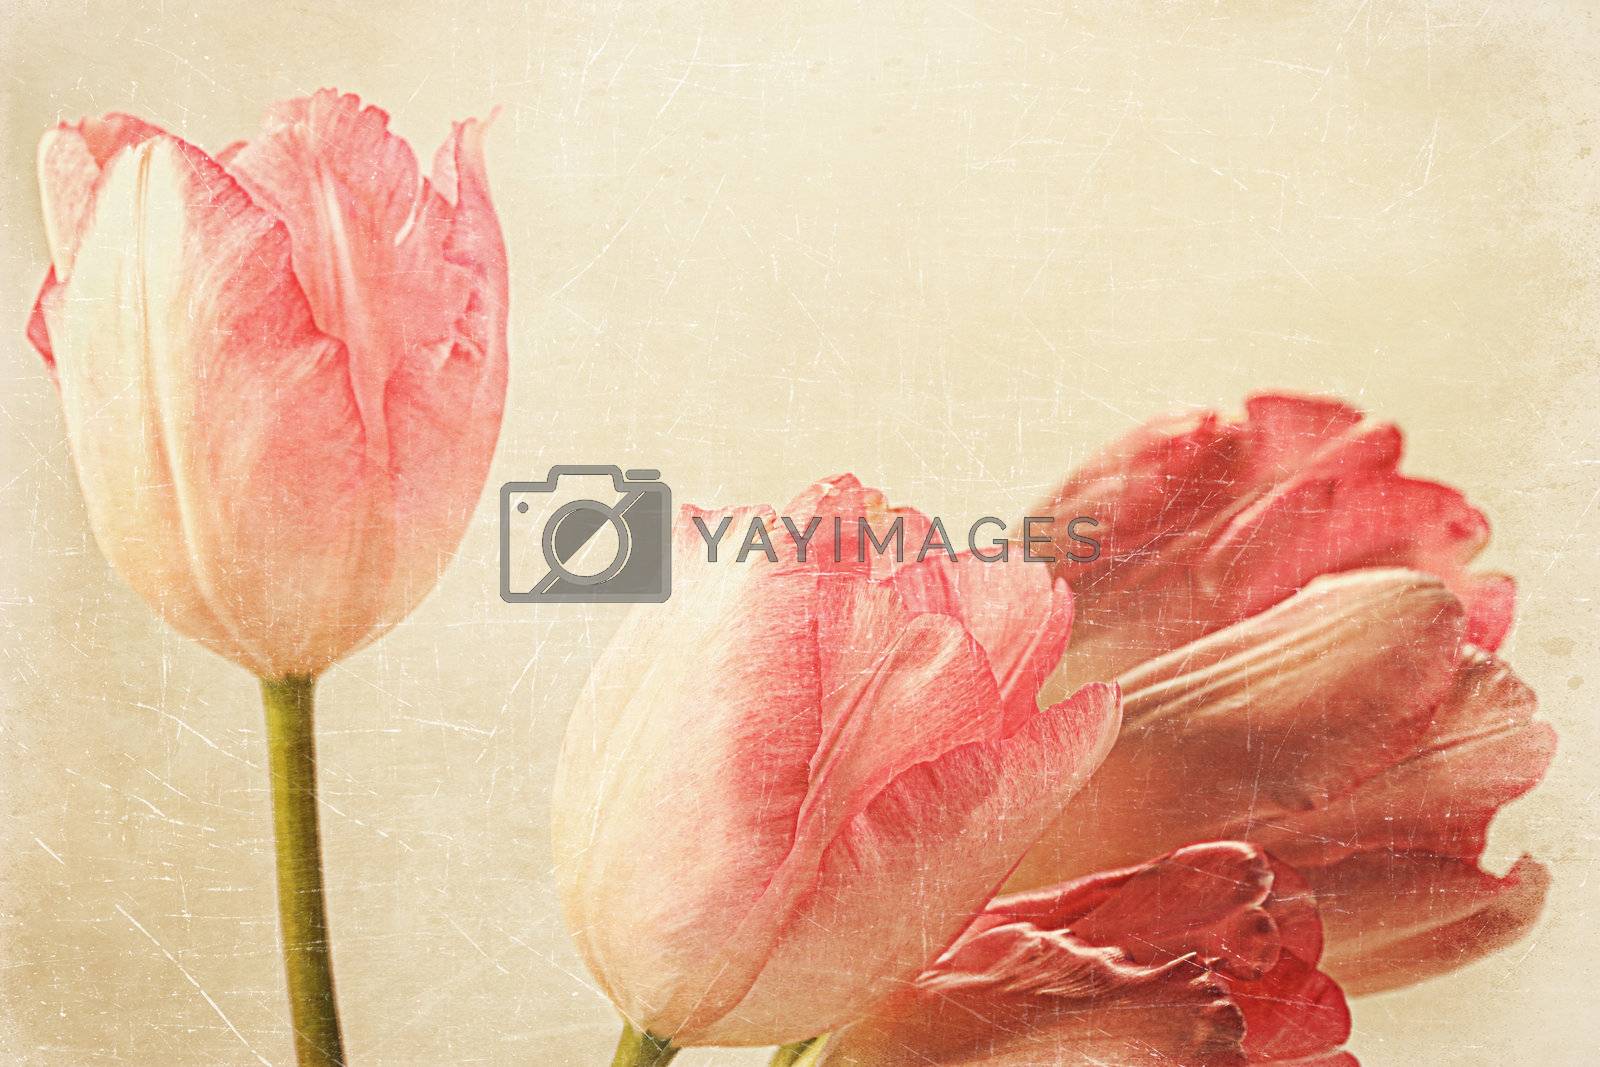 Royalty free image of Tulips with old vintage feeling by Sandralise